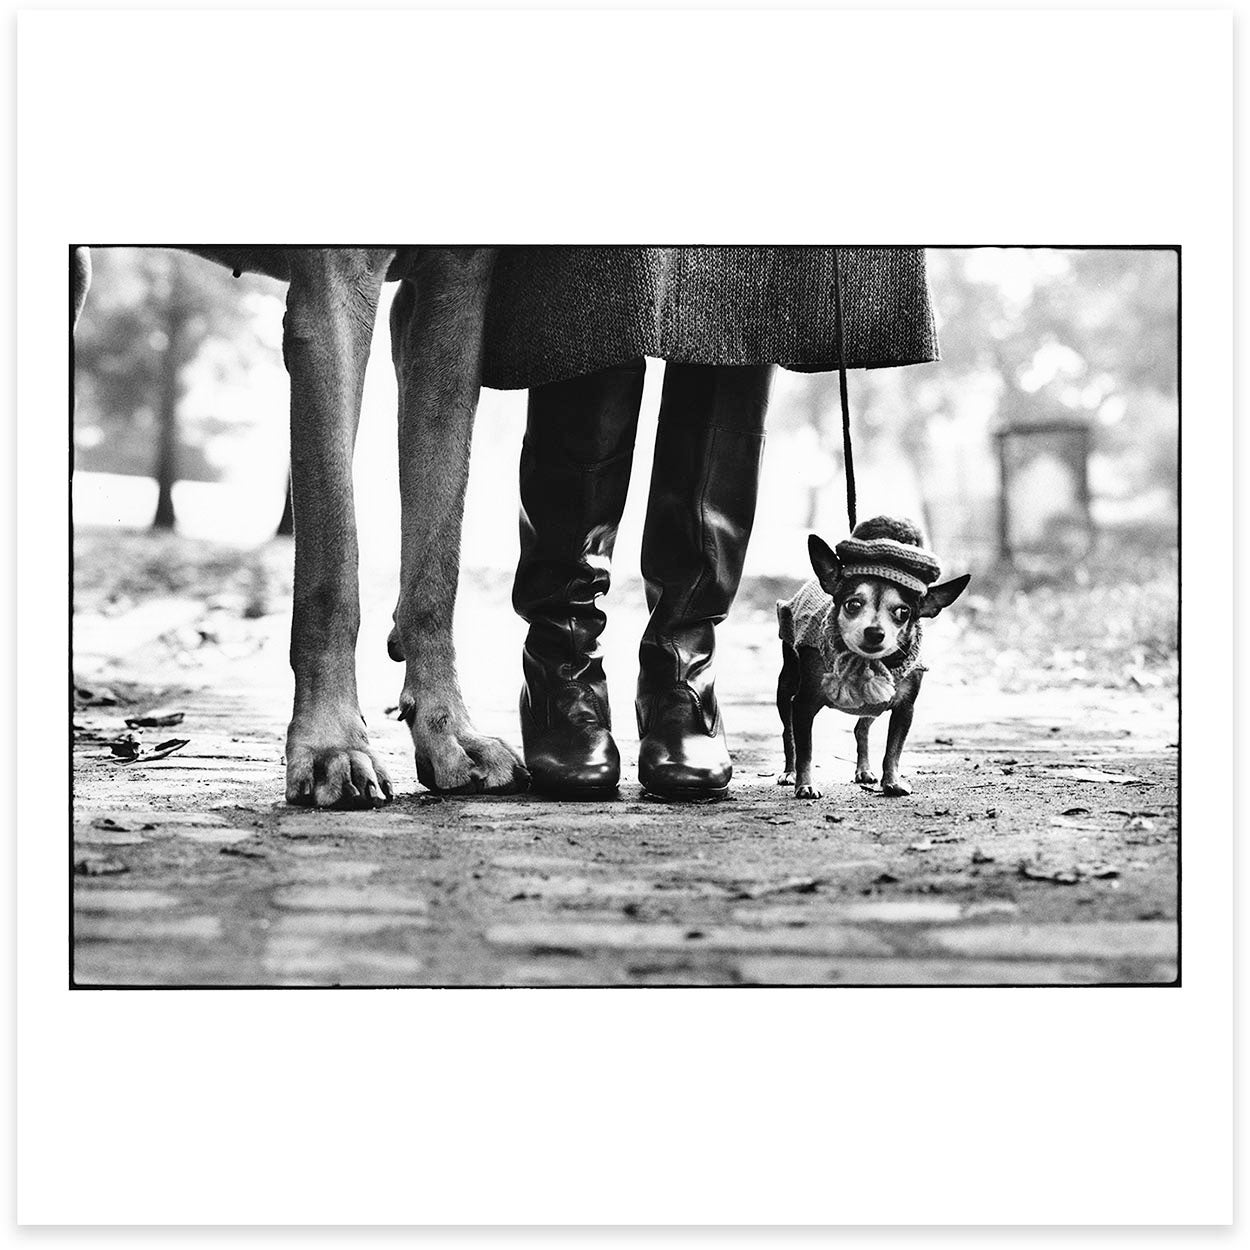 A small dog walks beside a human and a large dog. Only the feet of the latter two can be seen.